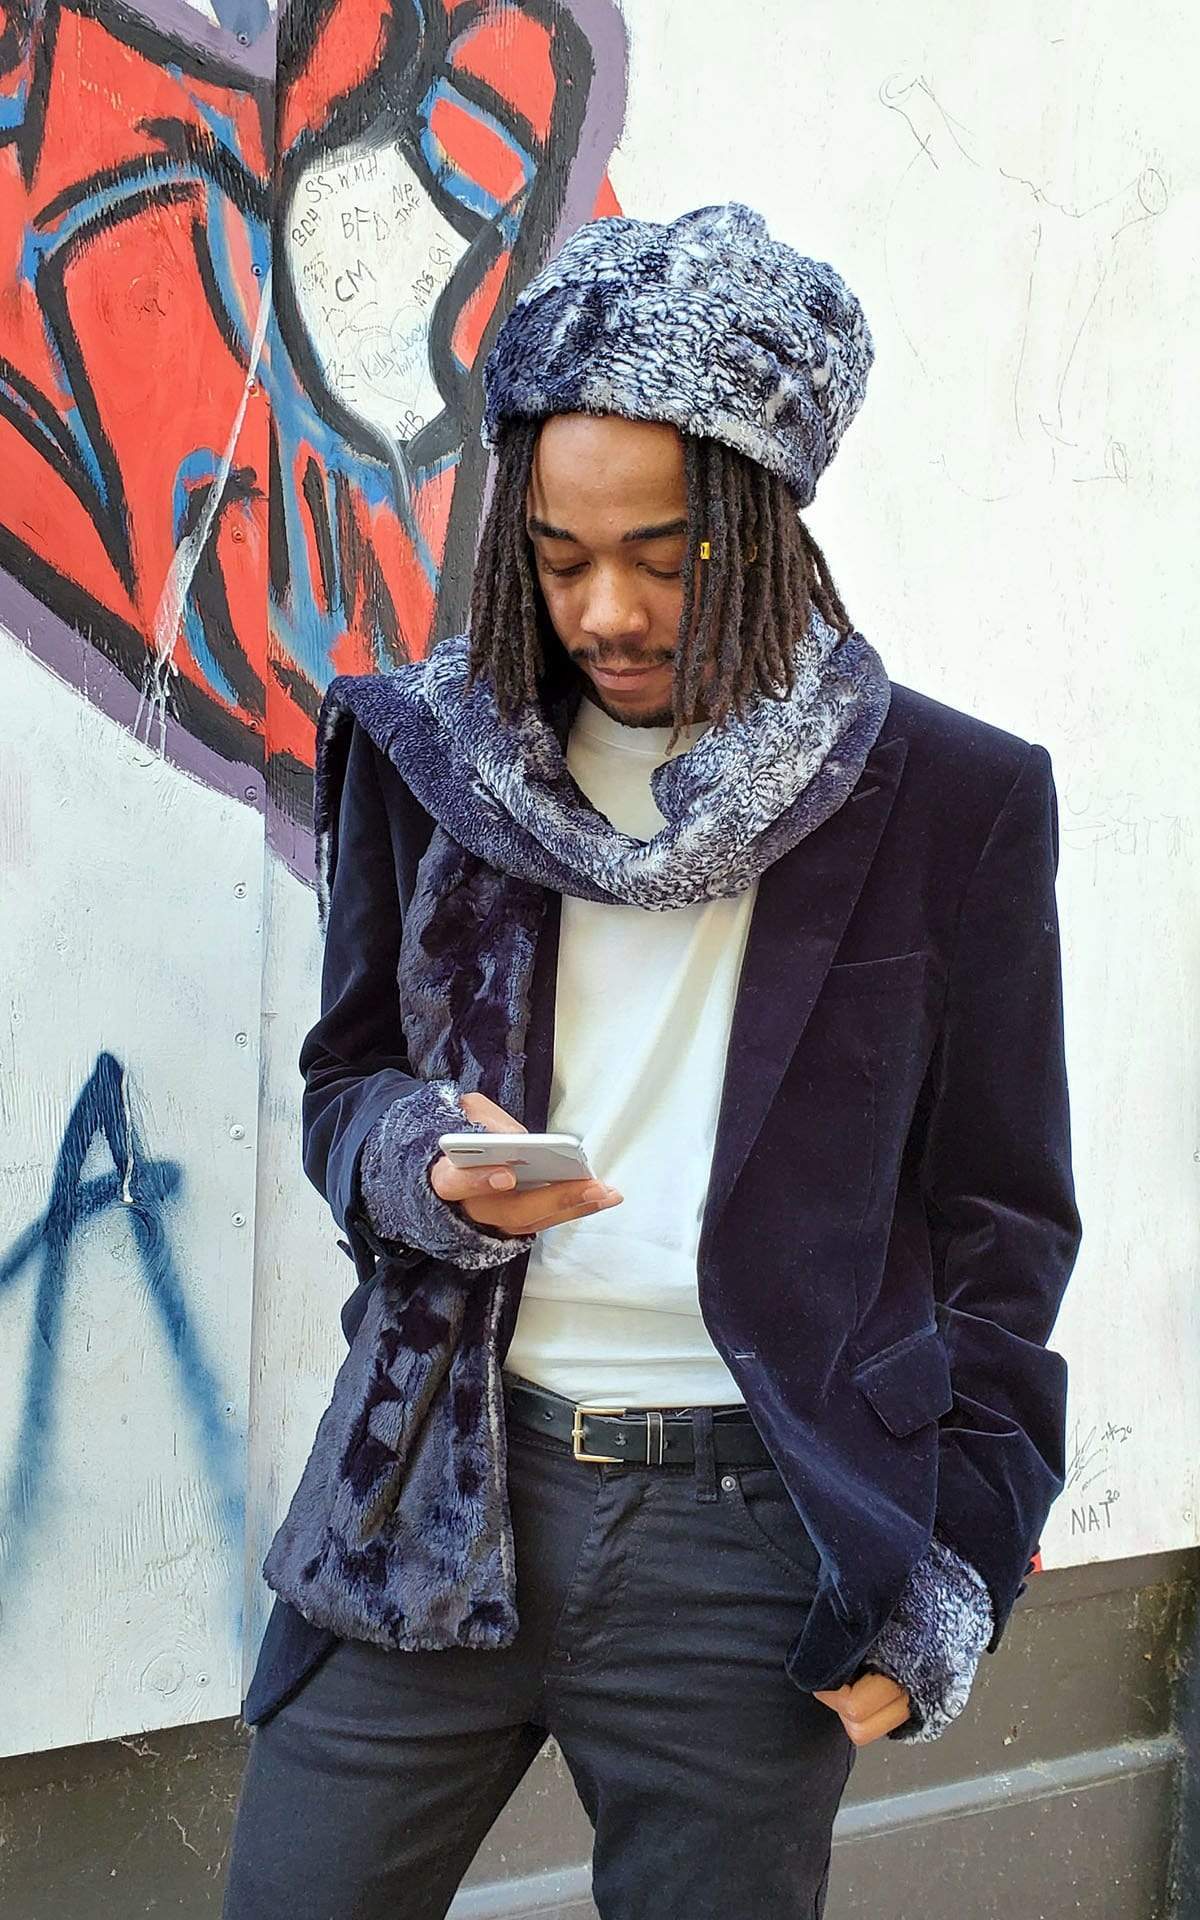  Male Model wearing beanie matching hat and  Classic Scarf against graffiti wall looking at phone | Black Mamba animal snake print with Cuddly Black Faux Fur | Handmade by Pandemonium Millinery Seattle, WA USA